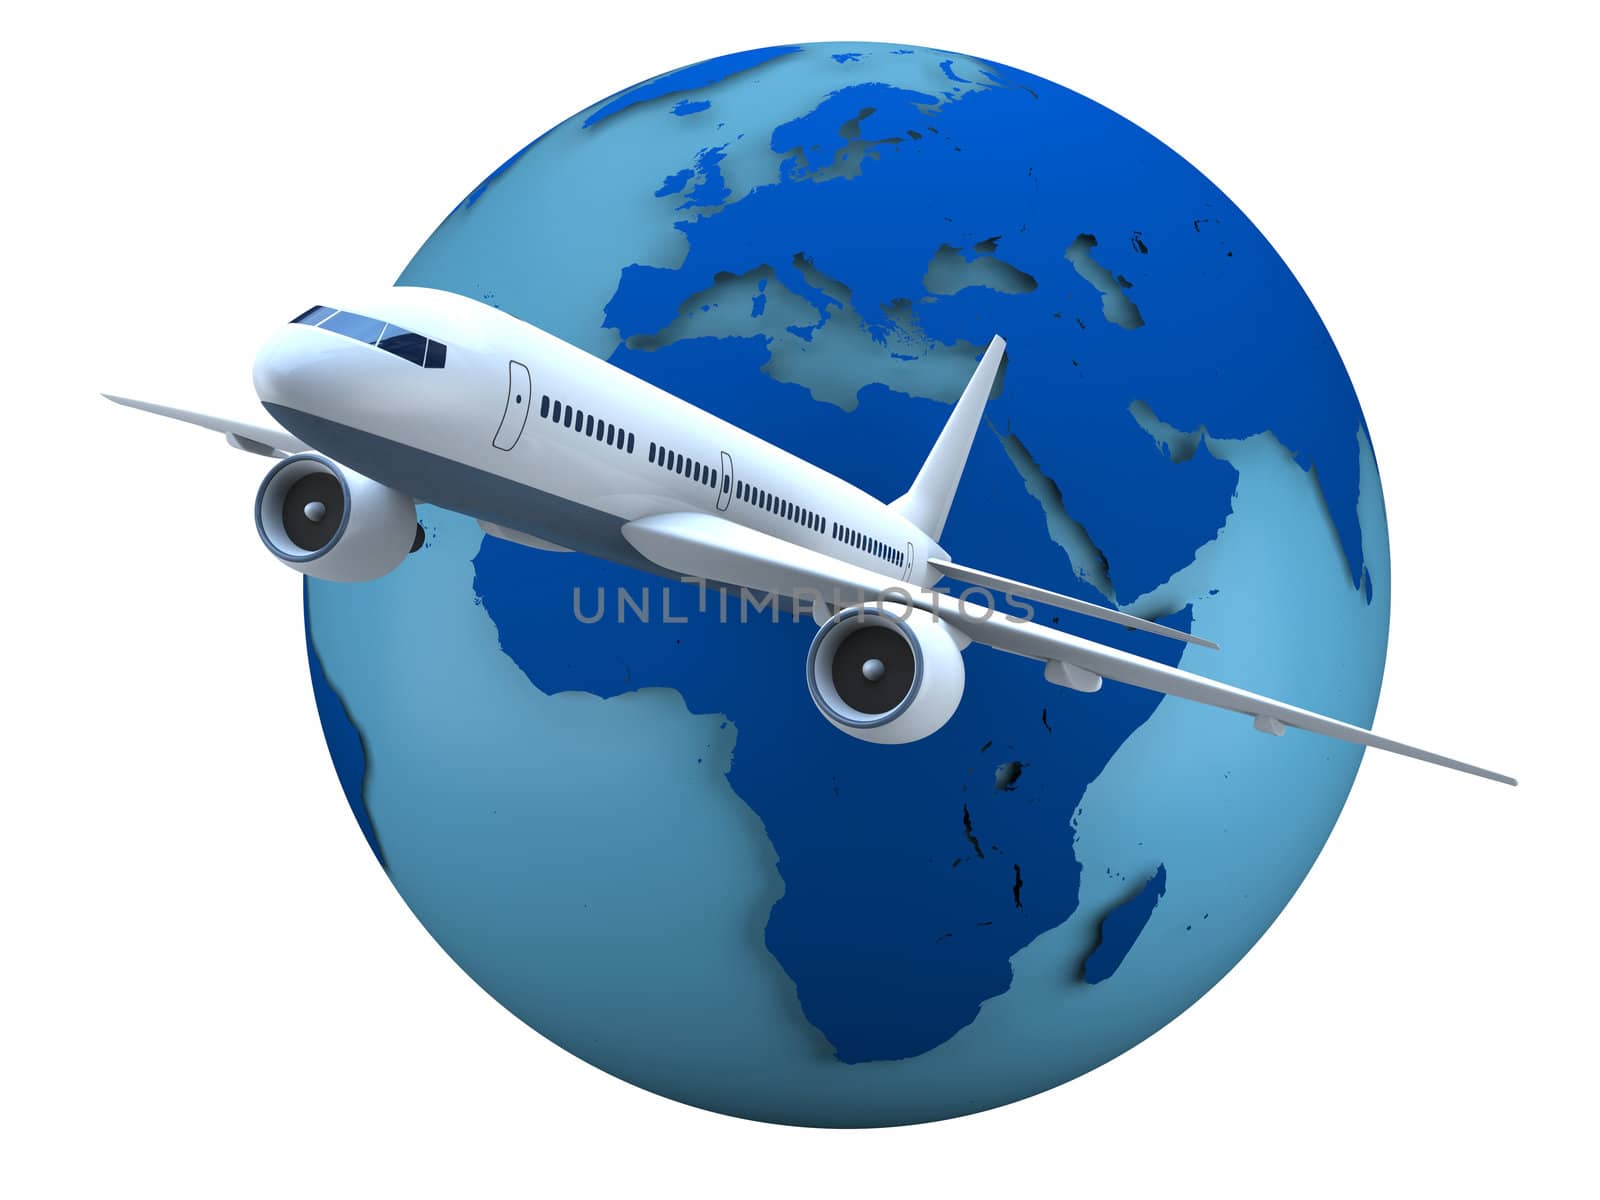 Concept of flying passenger aircraft with model of Earth in the background isolated on white background. Map of Earth provided by visibleearth.nasa.gov